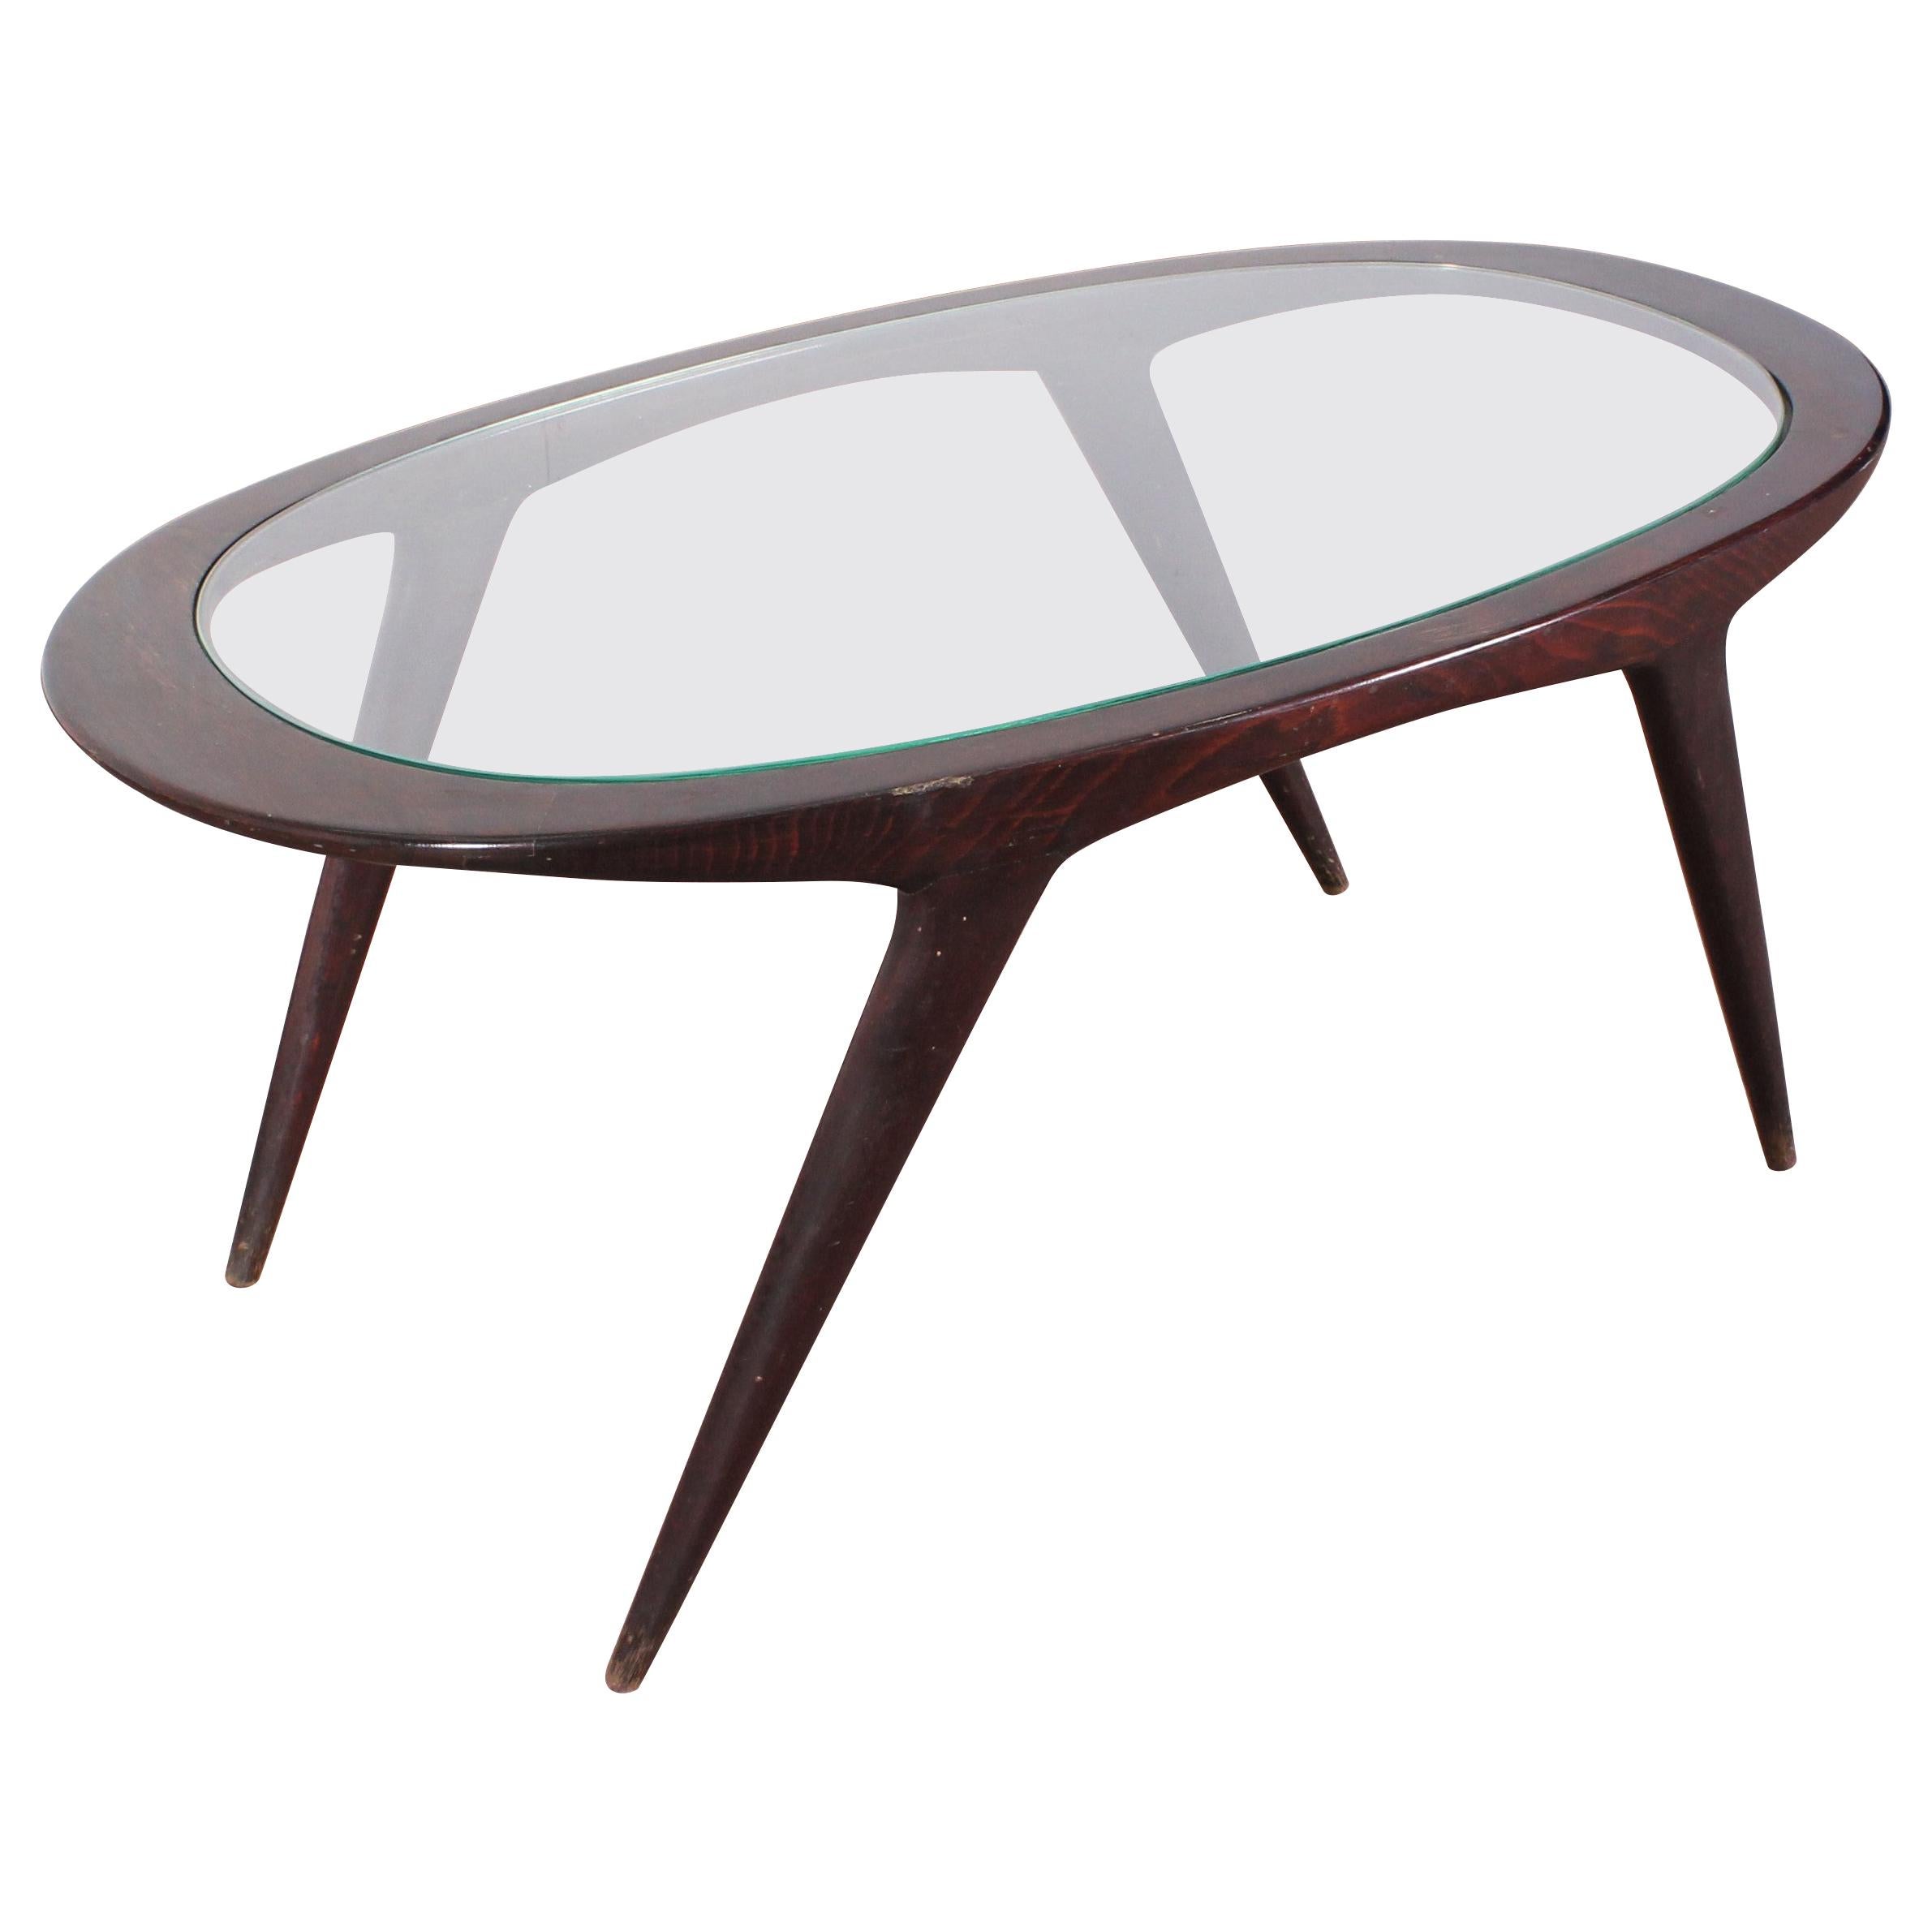 Ico Parisi Midcentury Dark Wood and Glass Oval Coffee Table, Italy, 1960s